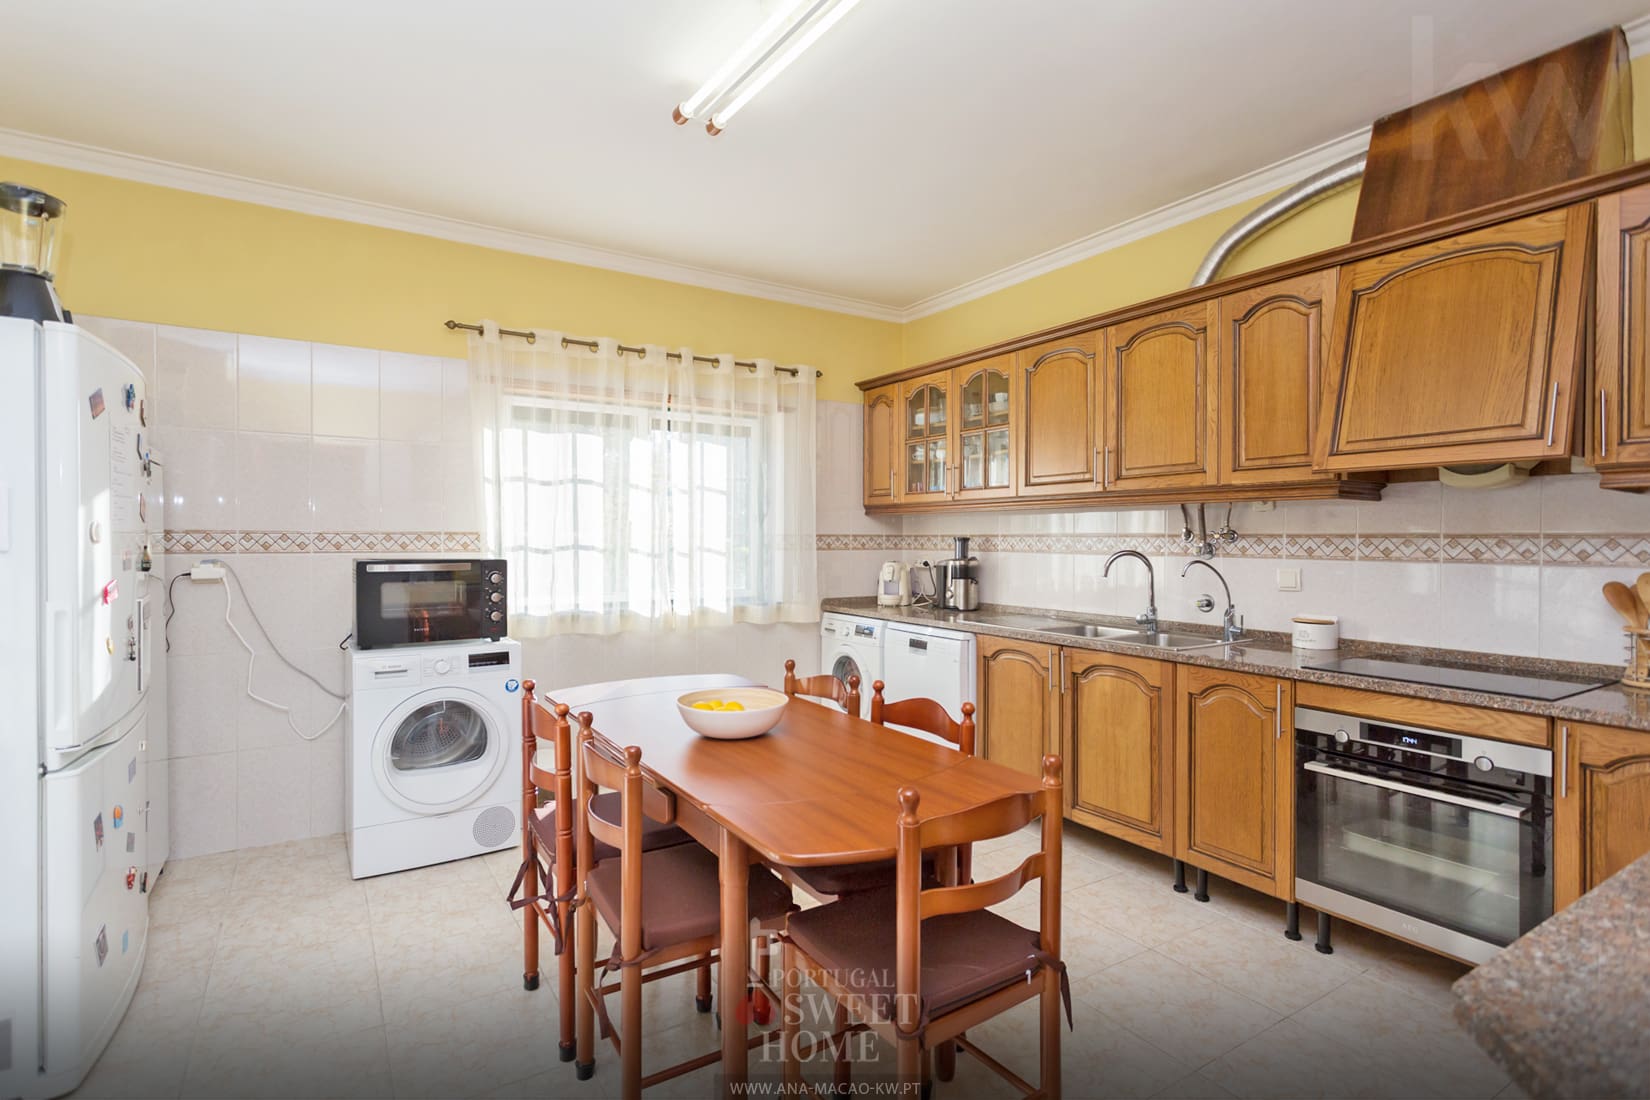 Fully equipped kitchen (18.7 m2)